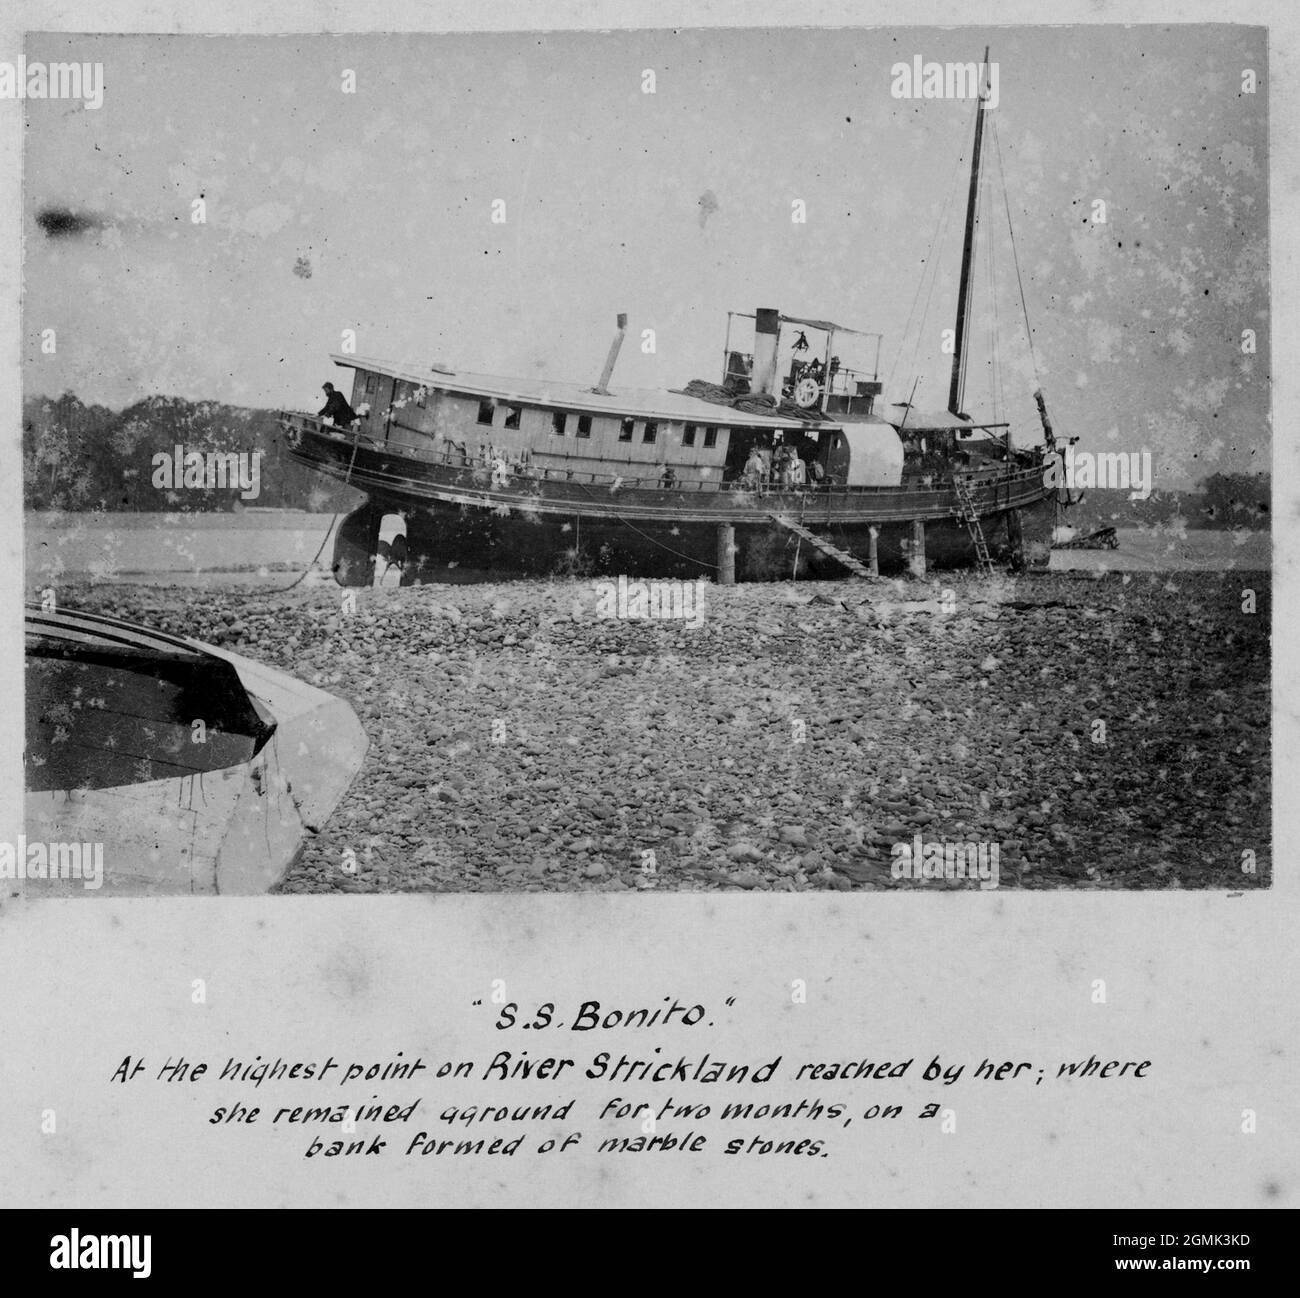 The SS Bonito stranded on the Strickland River in Papua New Guinea during the G.S.A. (Geographical Society of Australasia) New Guinea Exploring Expedition 1885. The ship was refloated after two months. Stock Photo